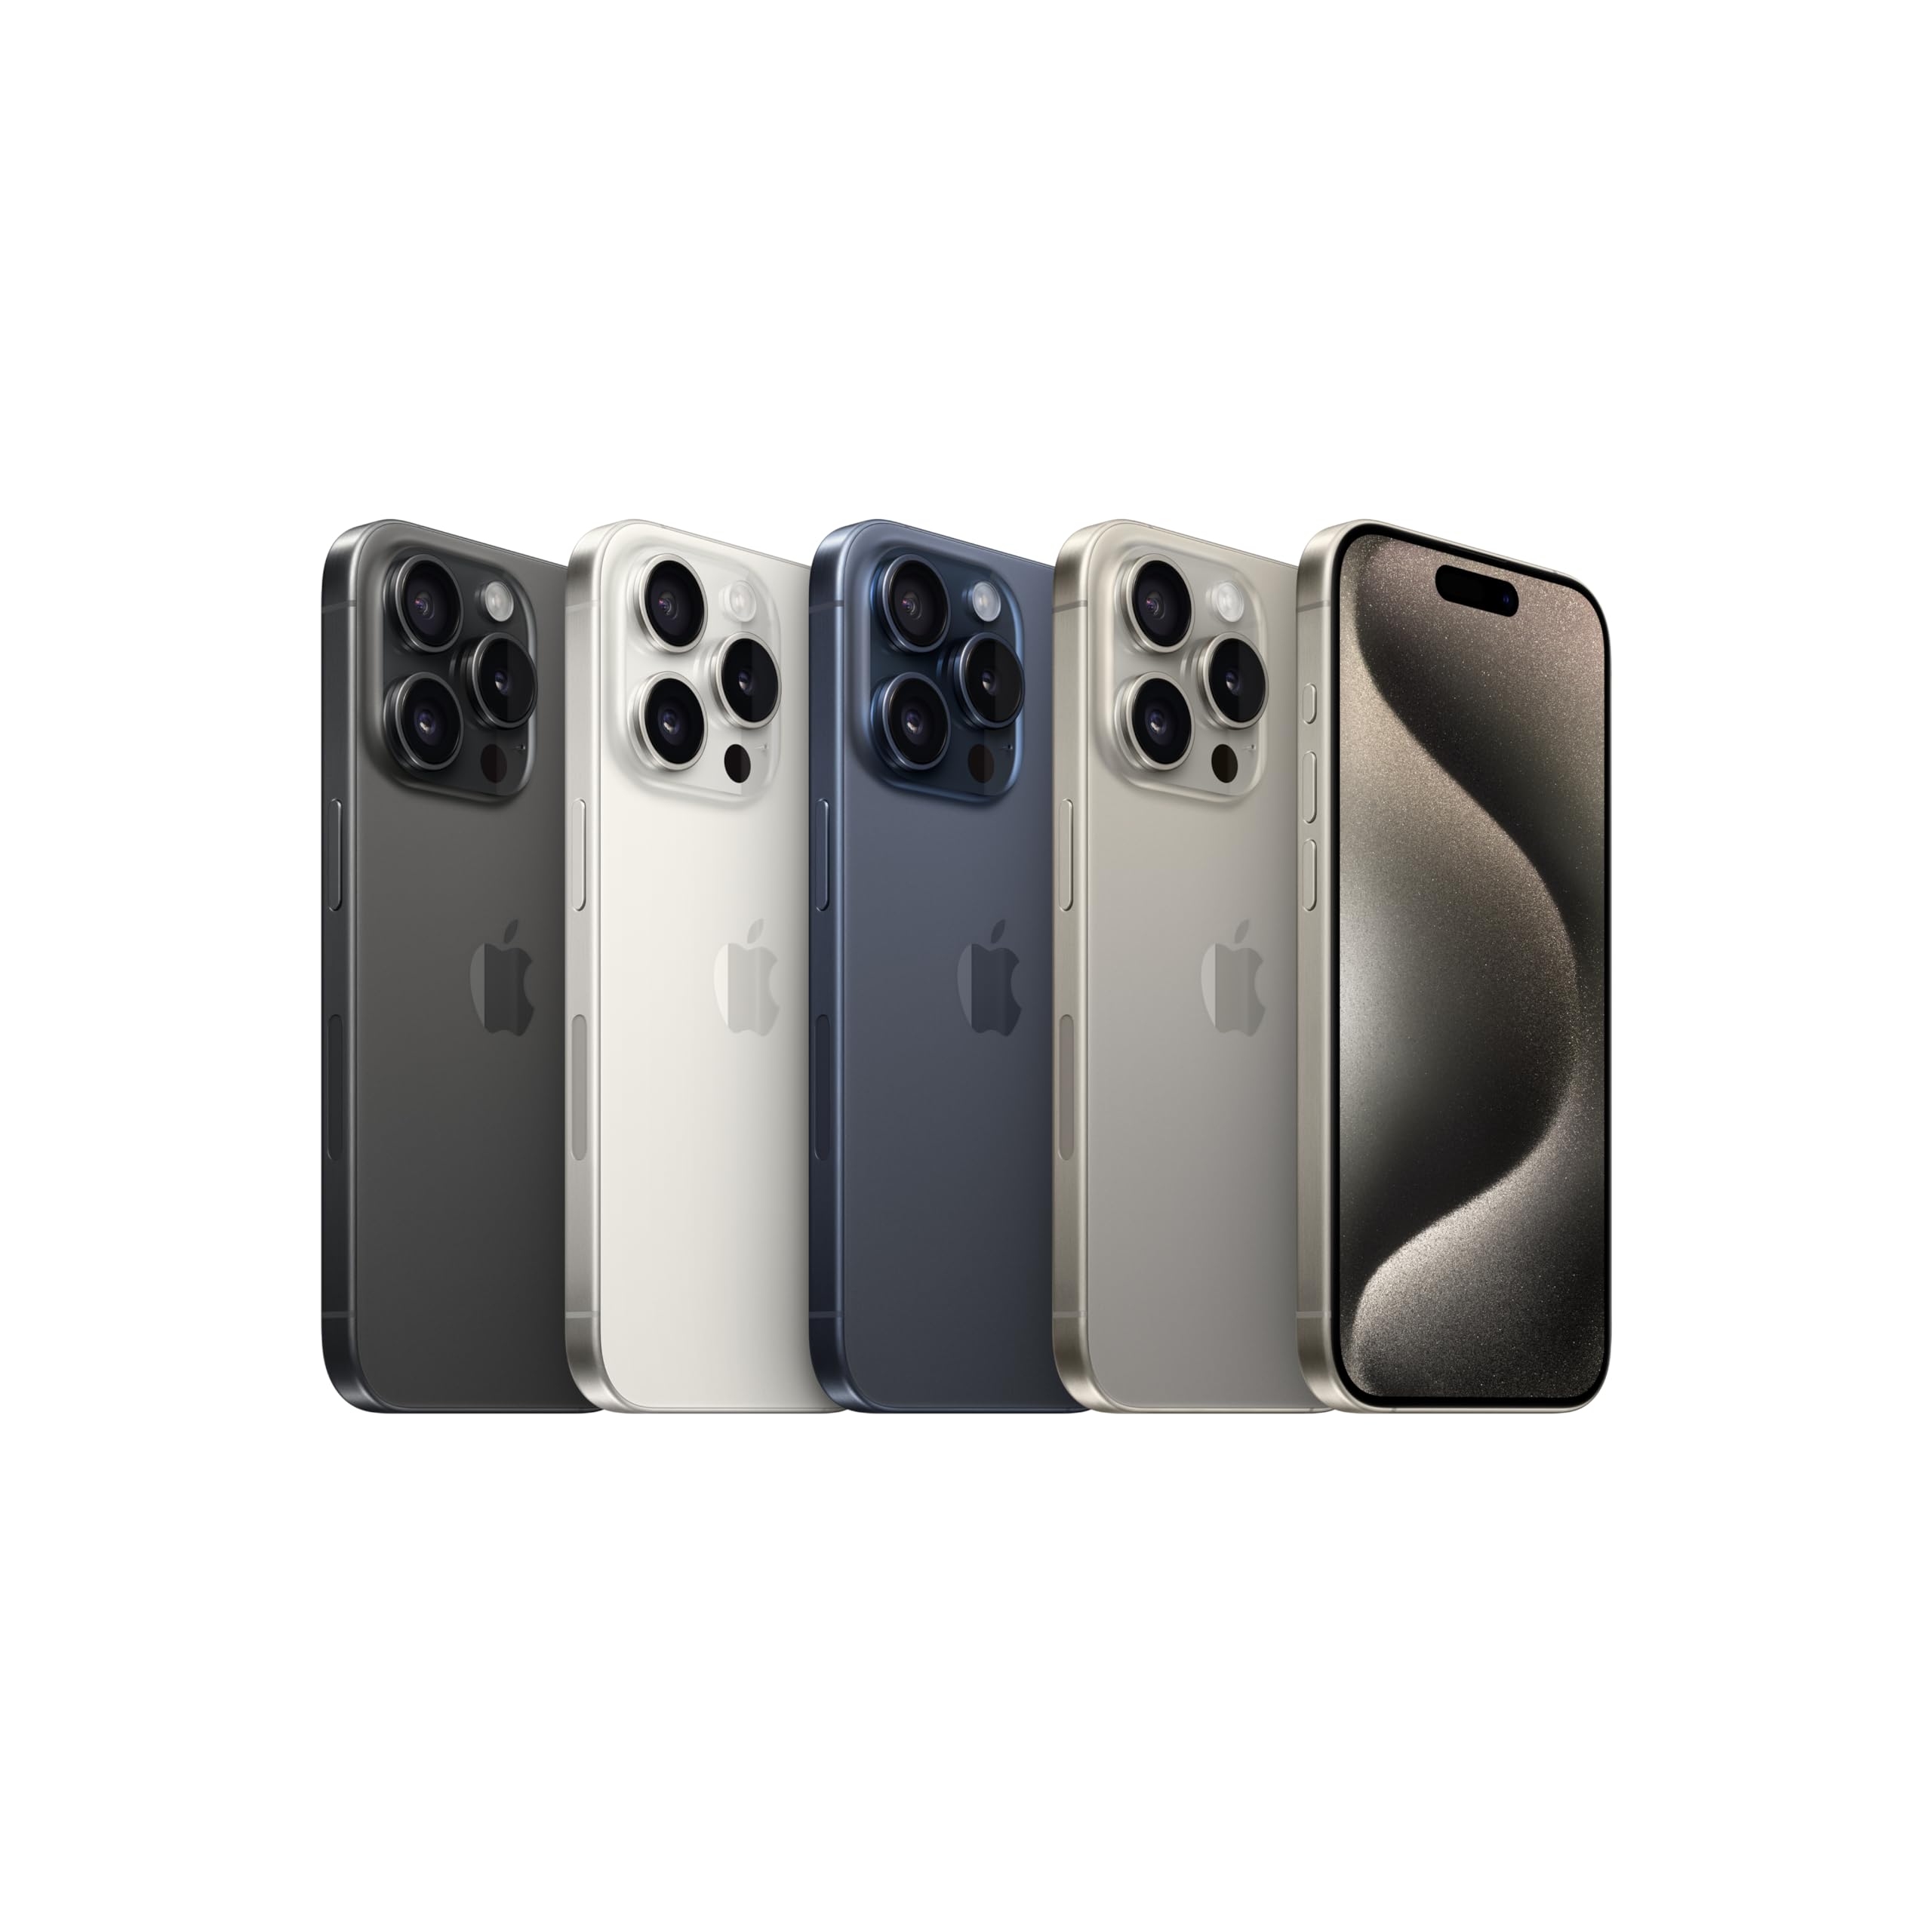 Apple iPhone 15 Pro (512 GB) - Blue Titanium | [Locked] | Boost Infinite plan required starting at $60/mo. | Unlimited Wireless | No trade-in needed to start | Get the latest iPhone every year